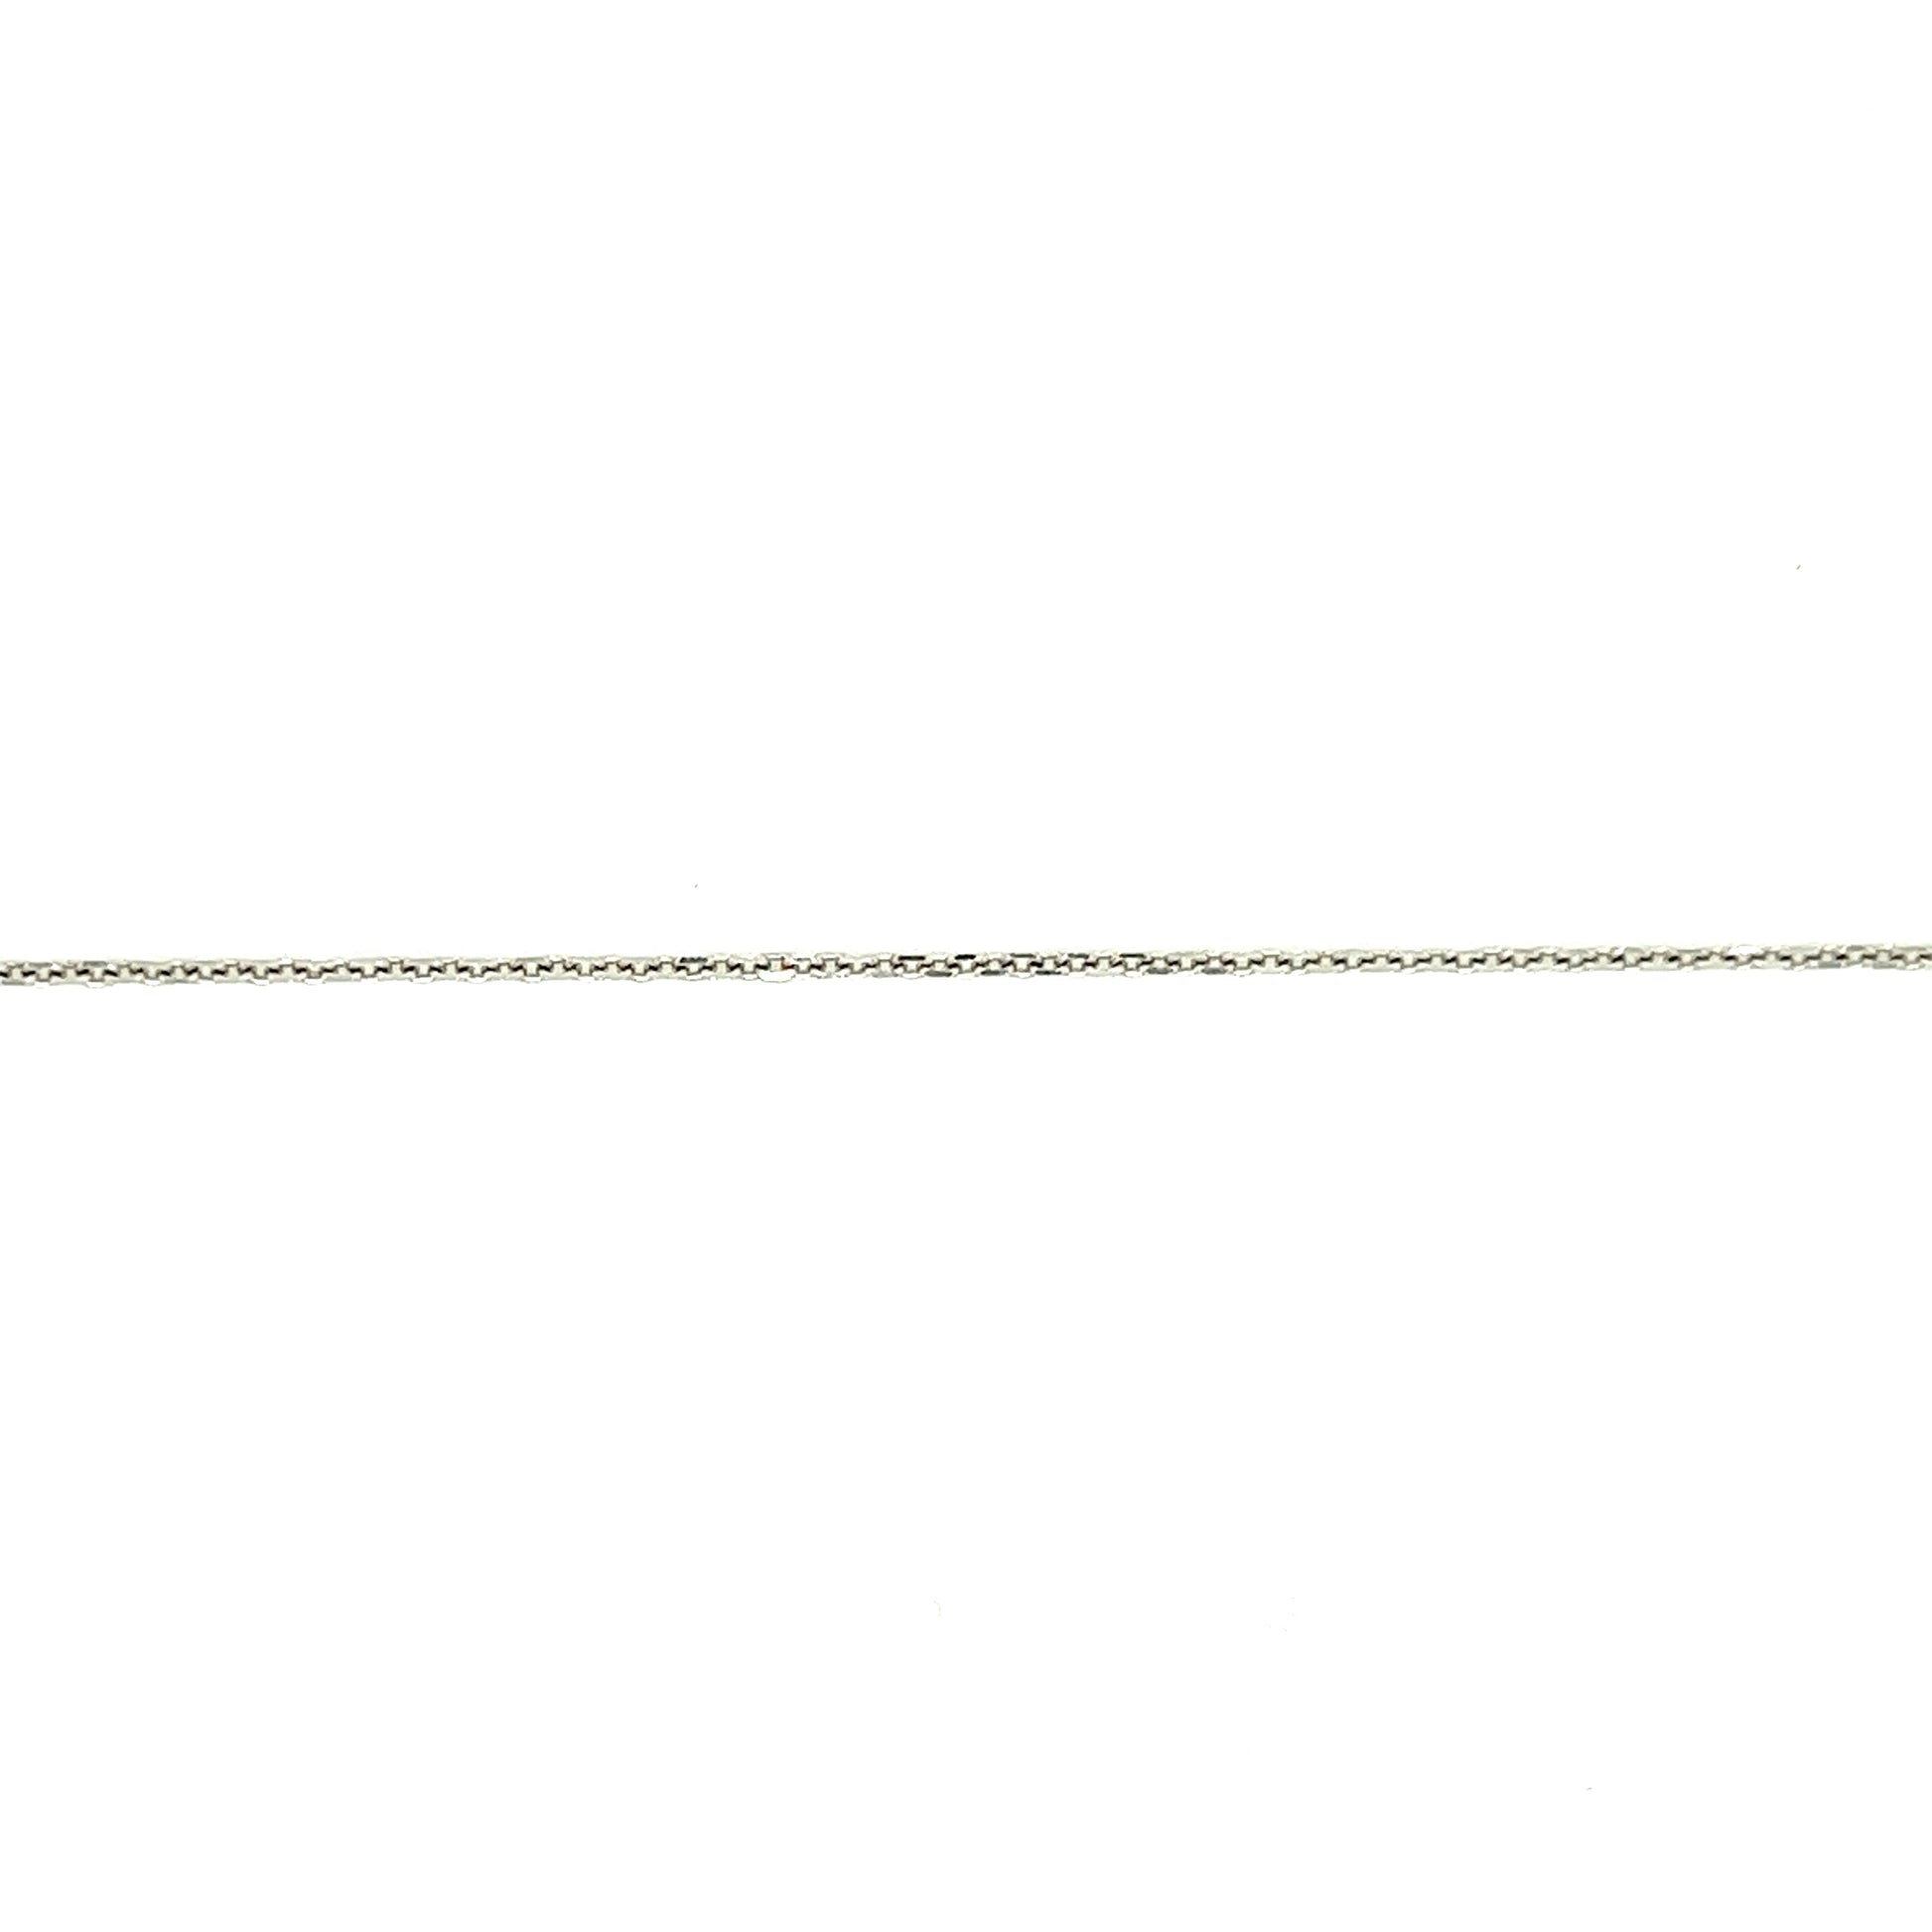 Cable Chain 1.0mm with Adjustable Length in 14K White Gold Chain View